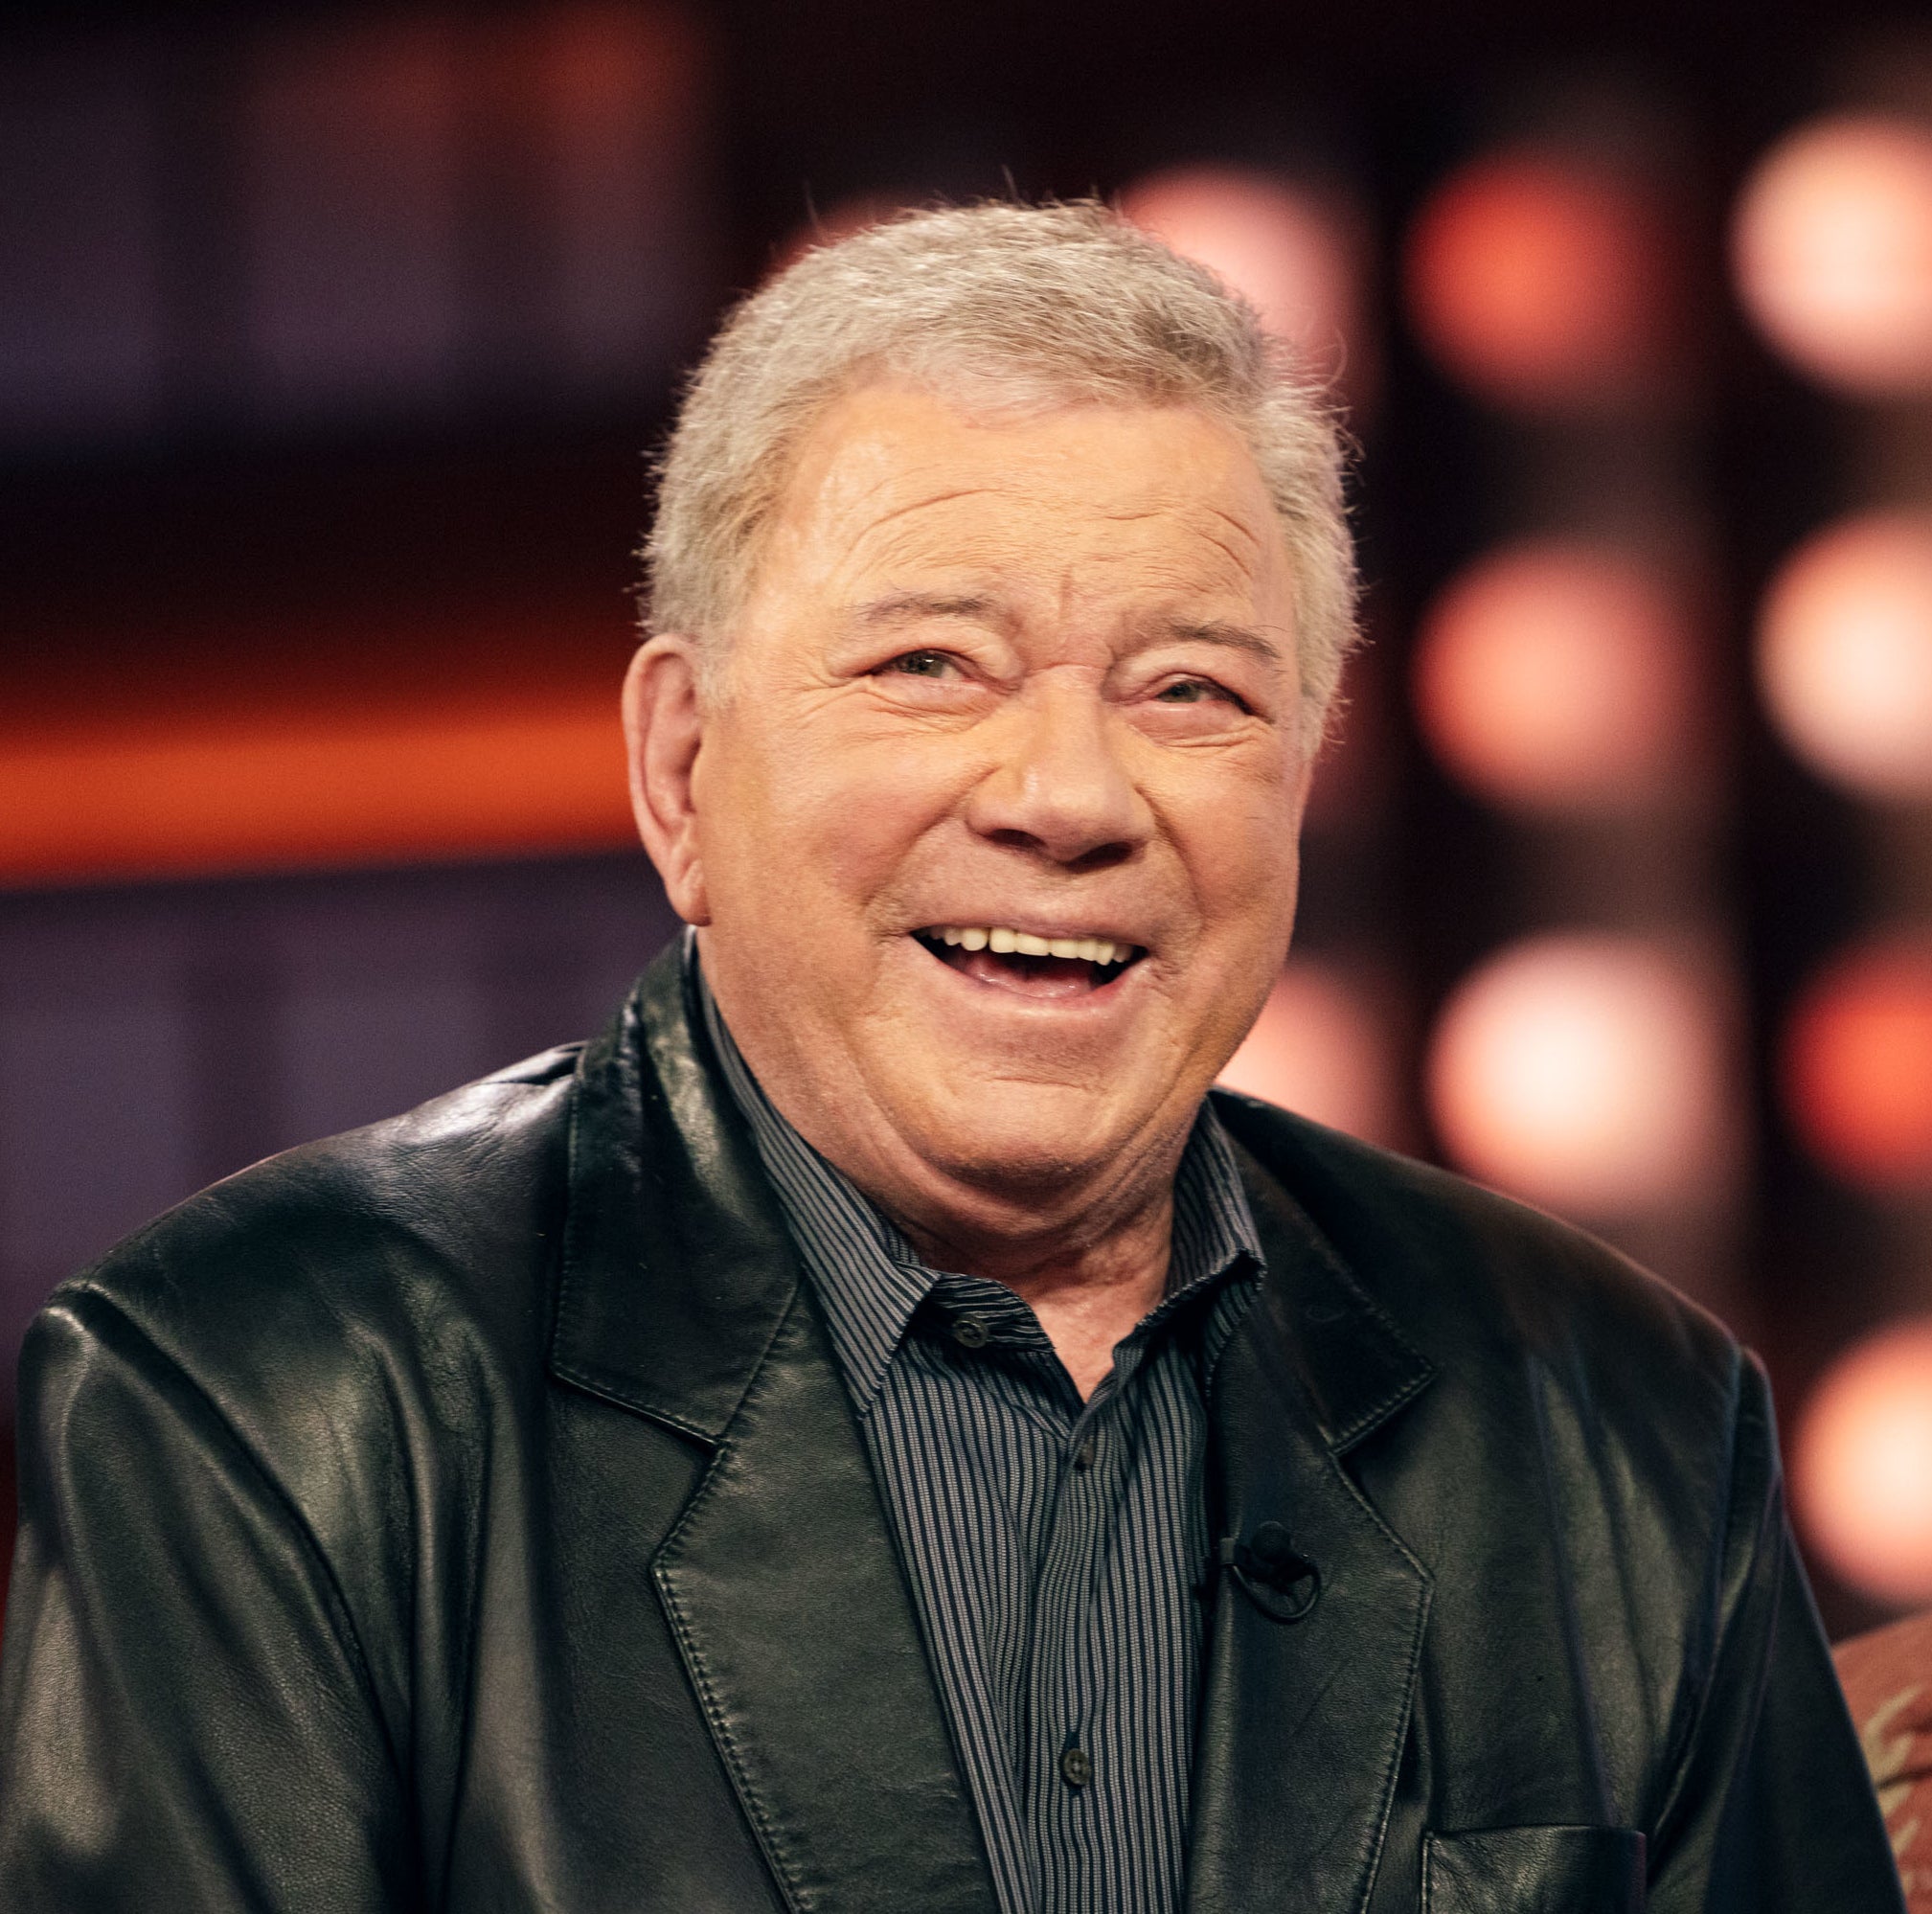 Smiling person in a leather jacket seated during an interview